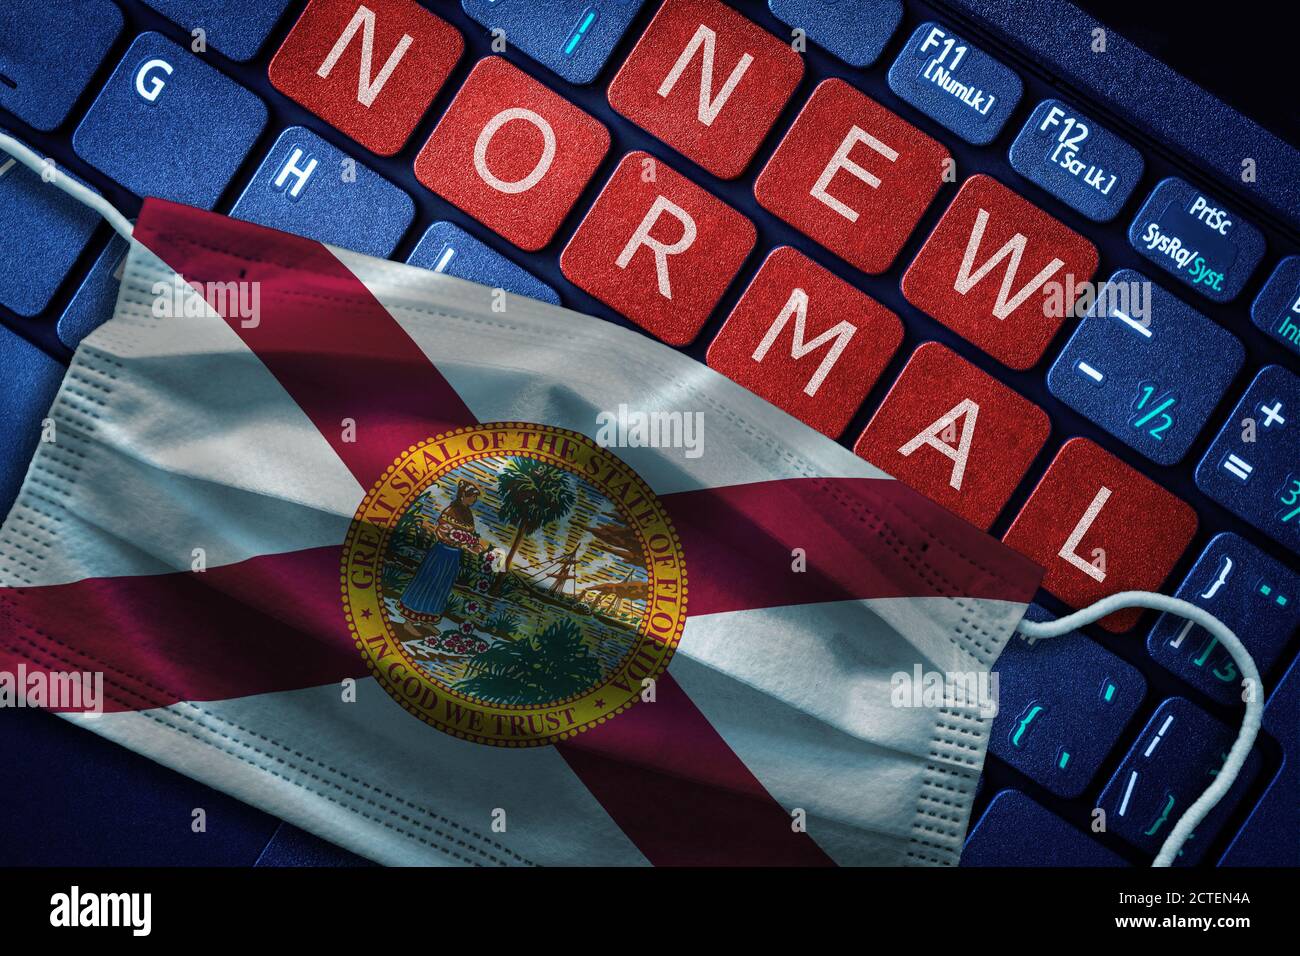 COVID-19 coronavirus new normal concept in the US state of Florida as shown by its state flag on face mask with New Normal on laptop red alert keyboar Stock Photo